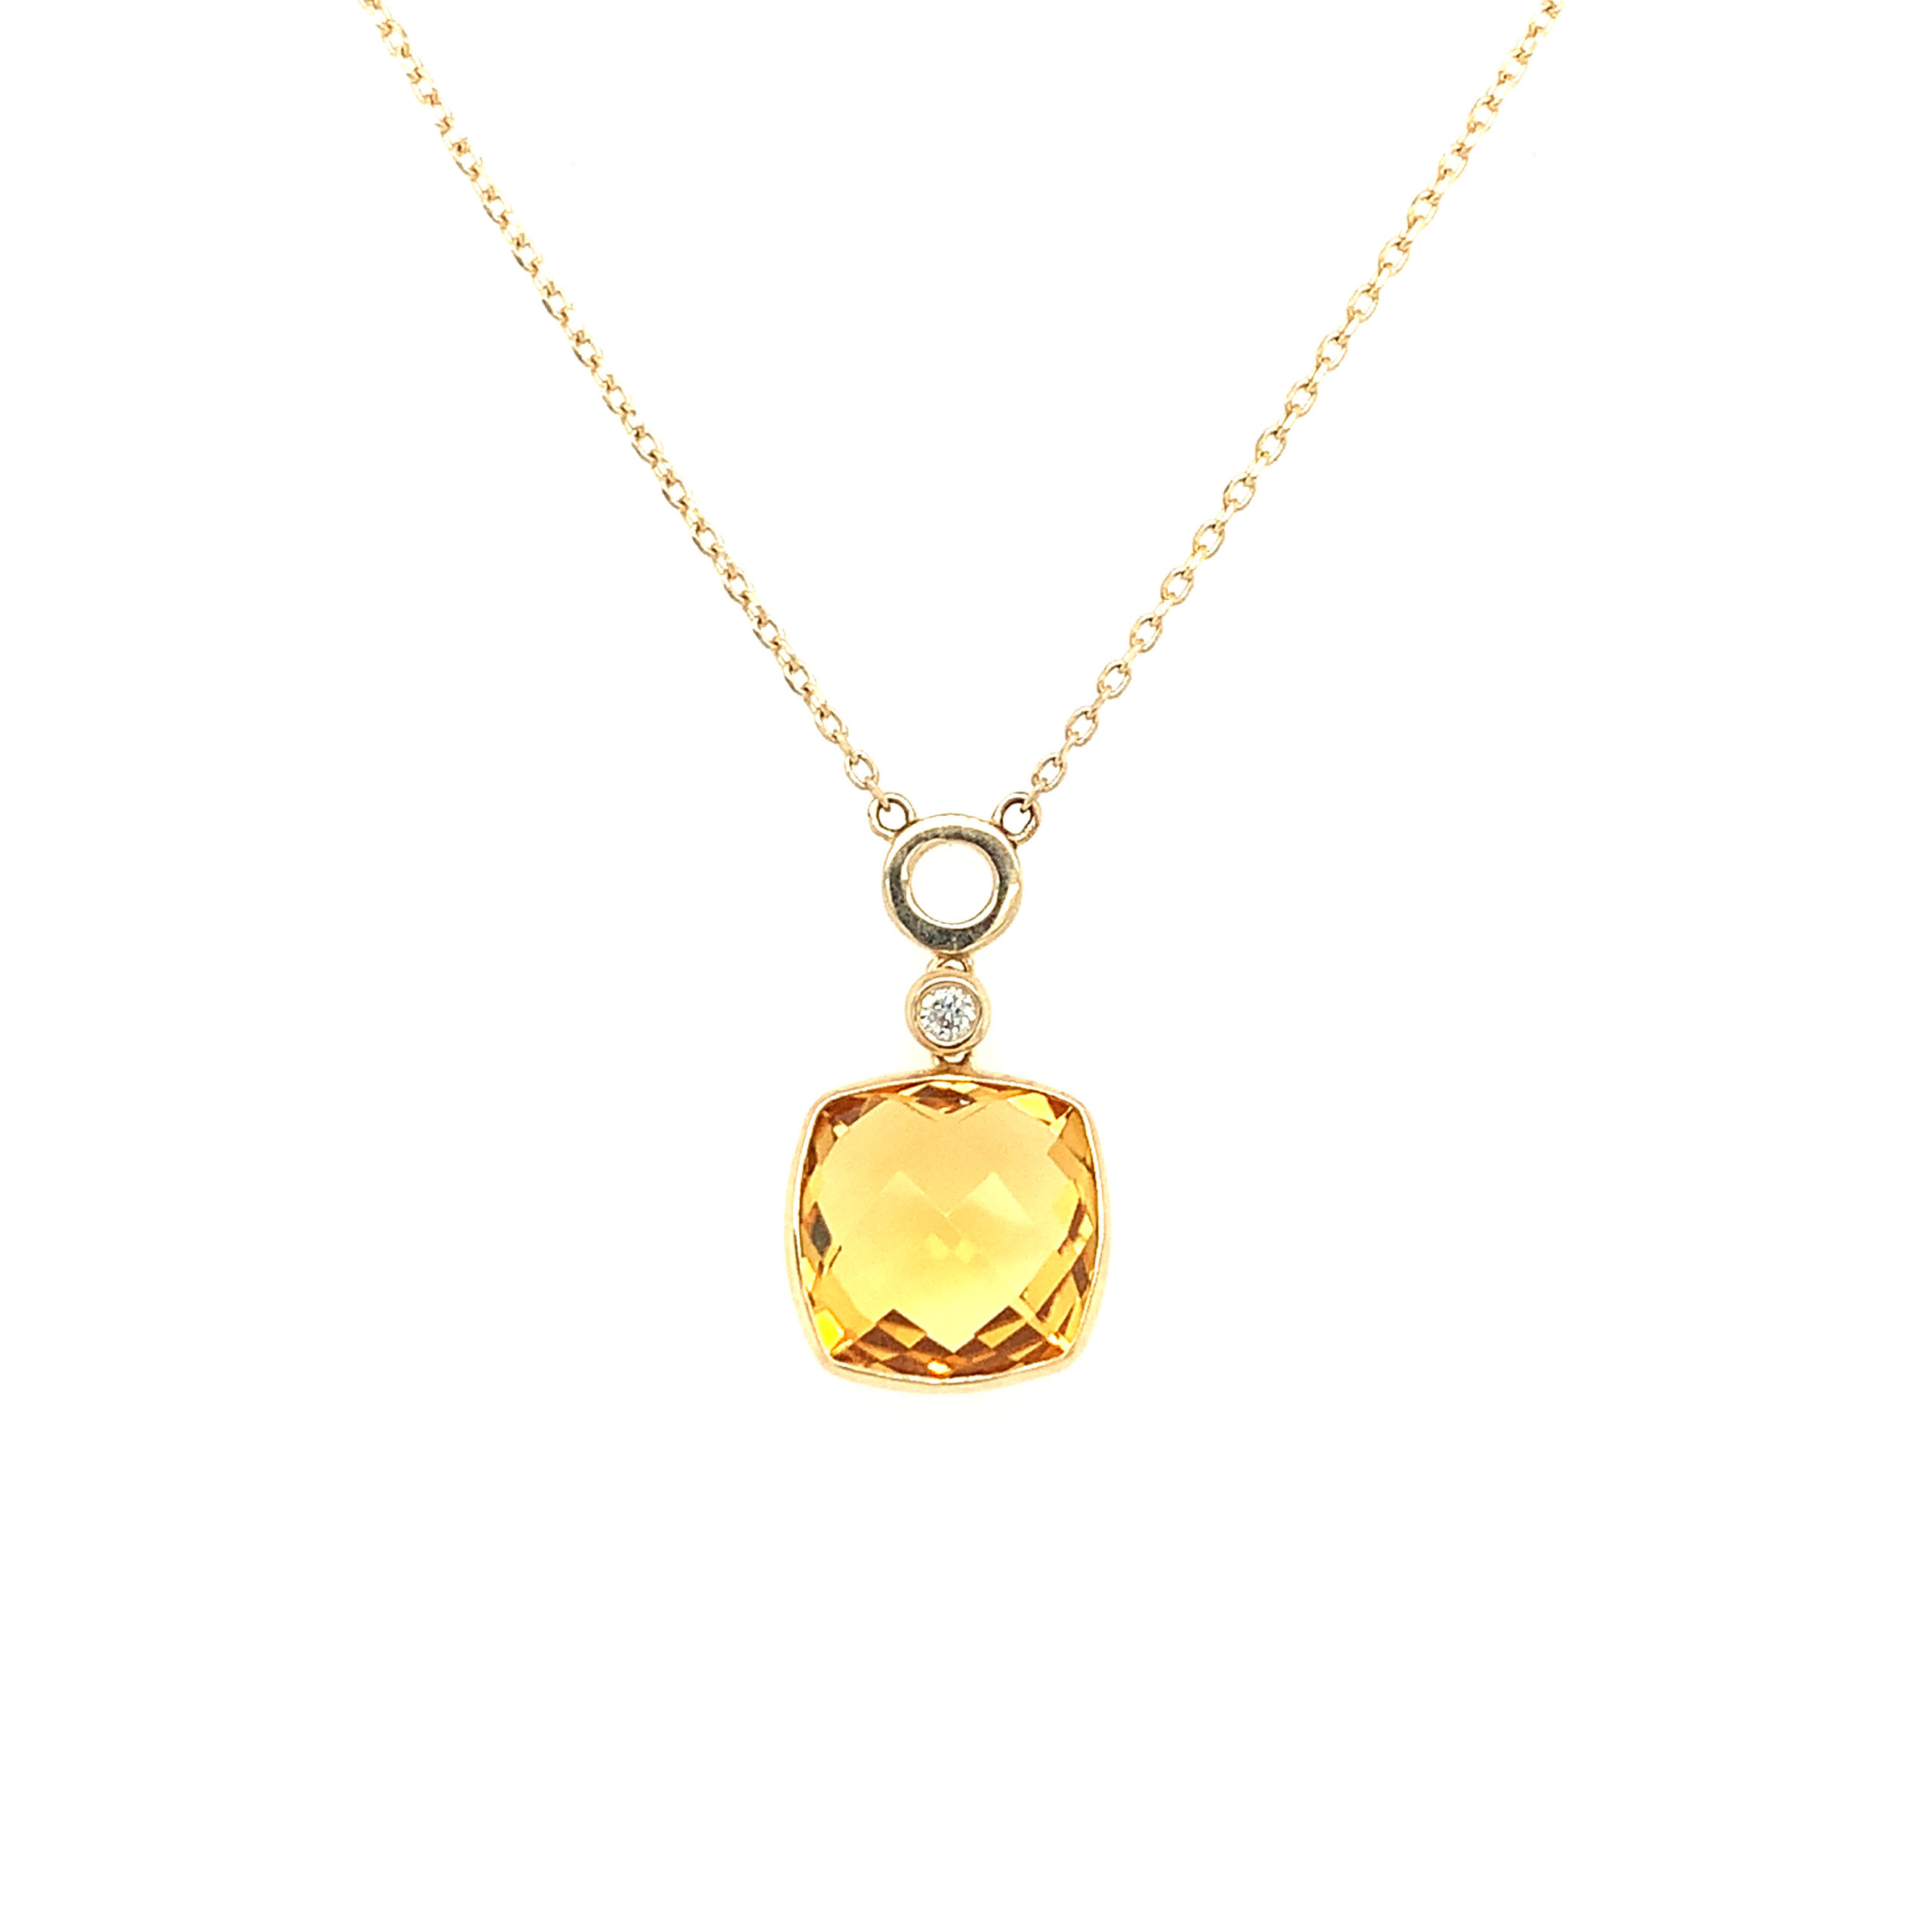 Citrine Diamond Flower Necklace in 18K Yellow Gold 0.02 ctw - Yellow Gold / Fashion Necklace | Pre-owned & Certified | used Second Hand | Womens